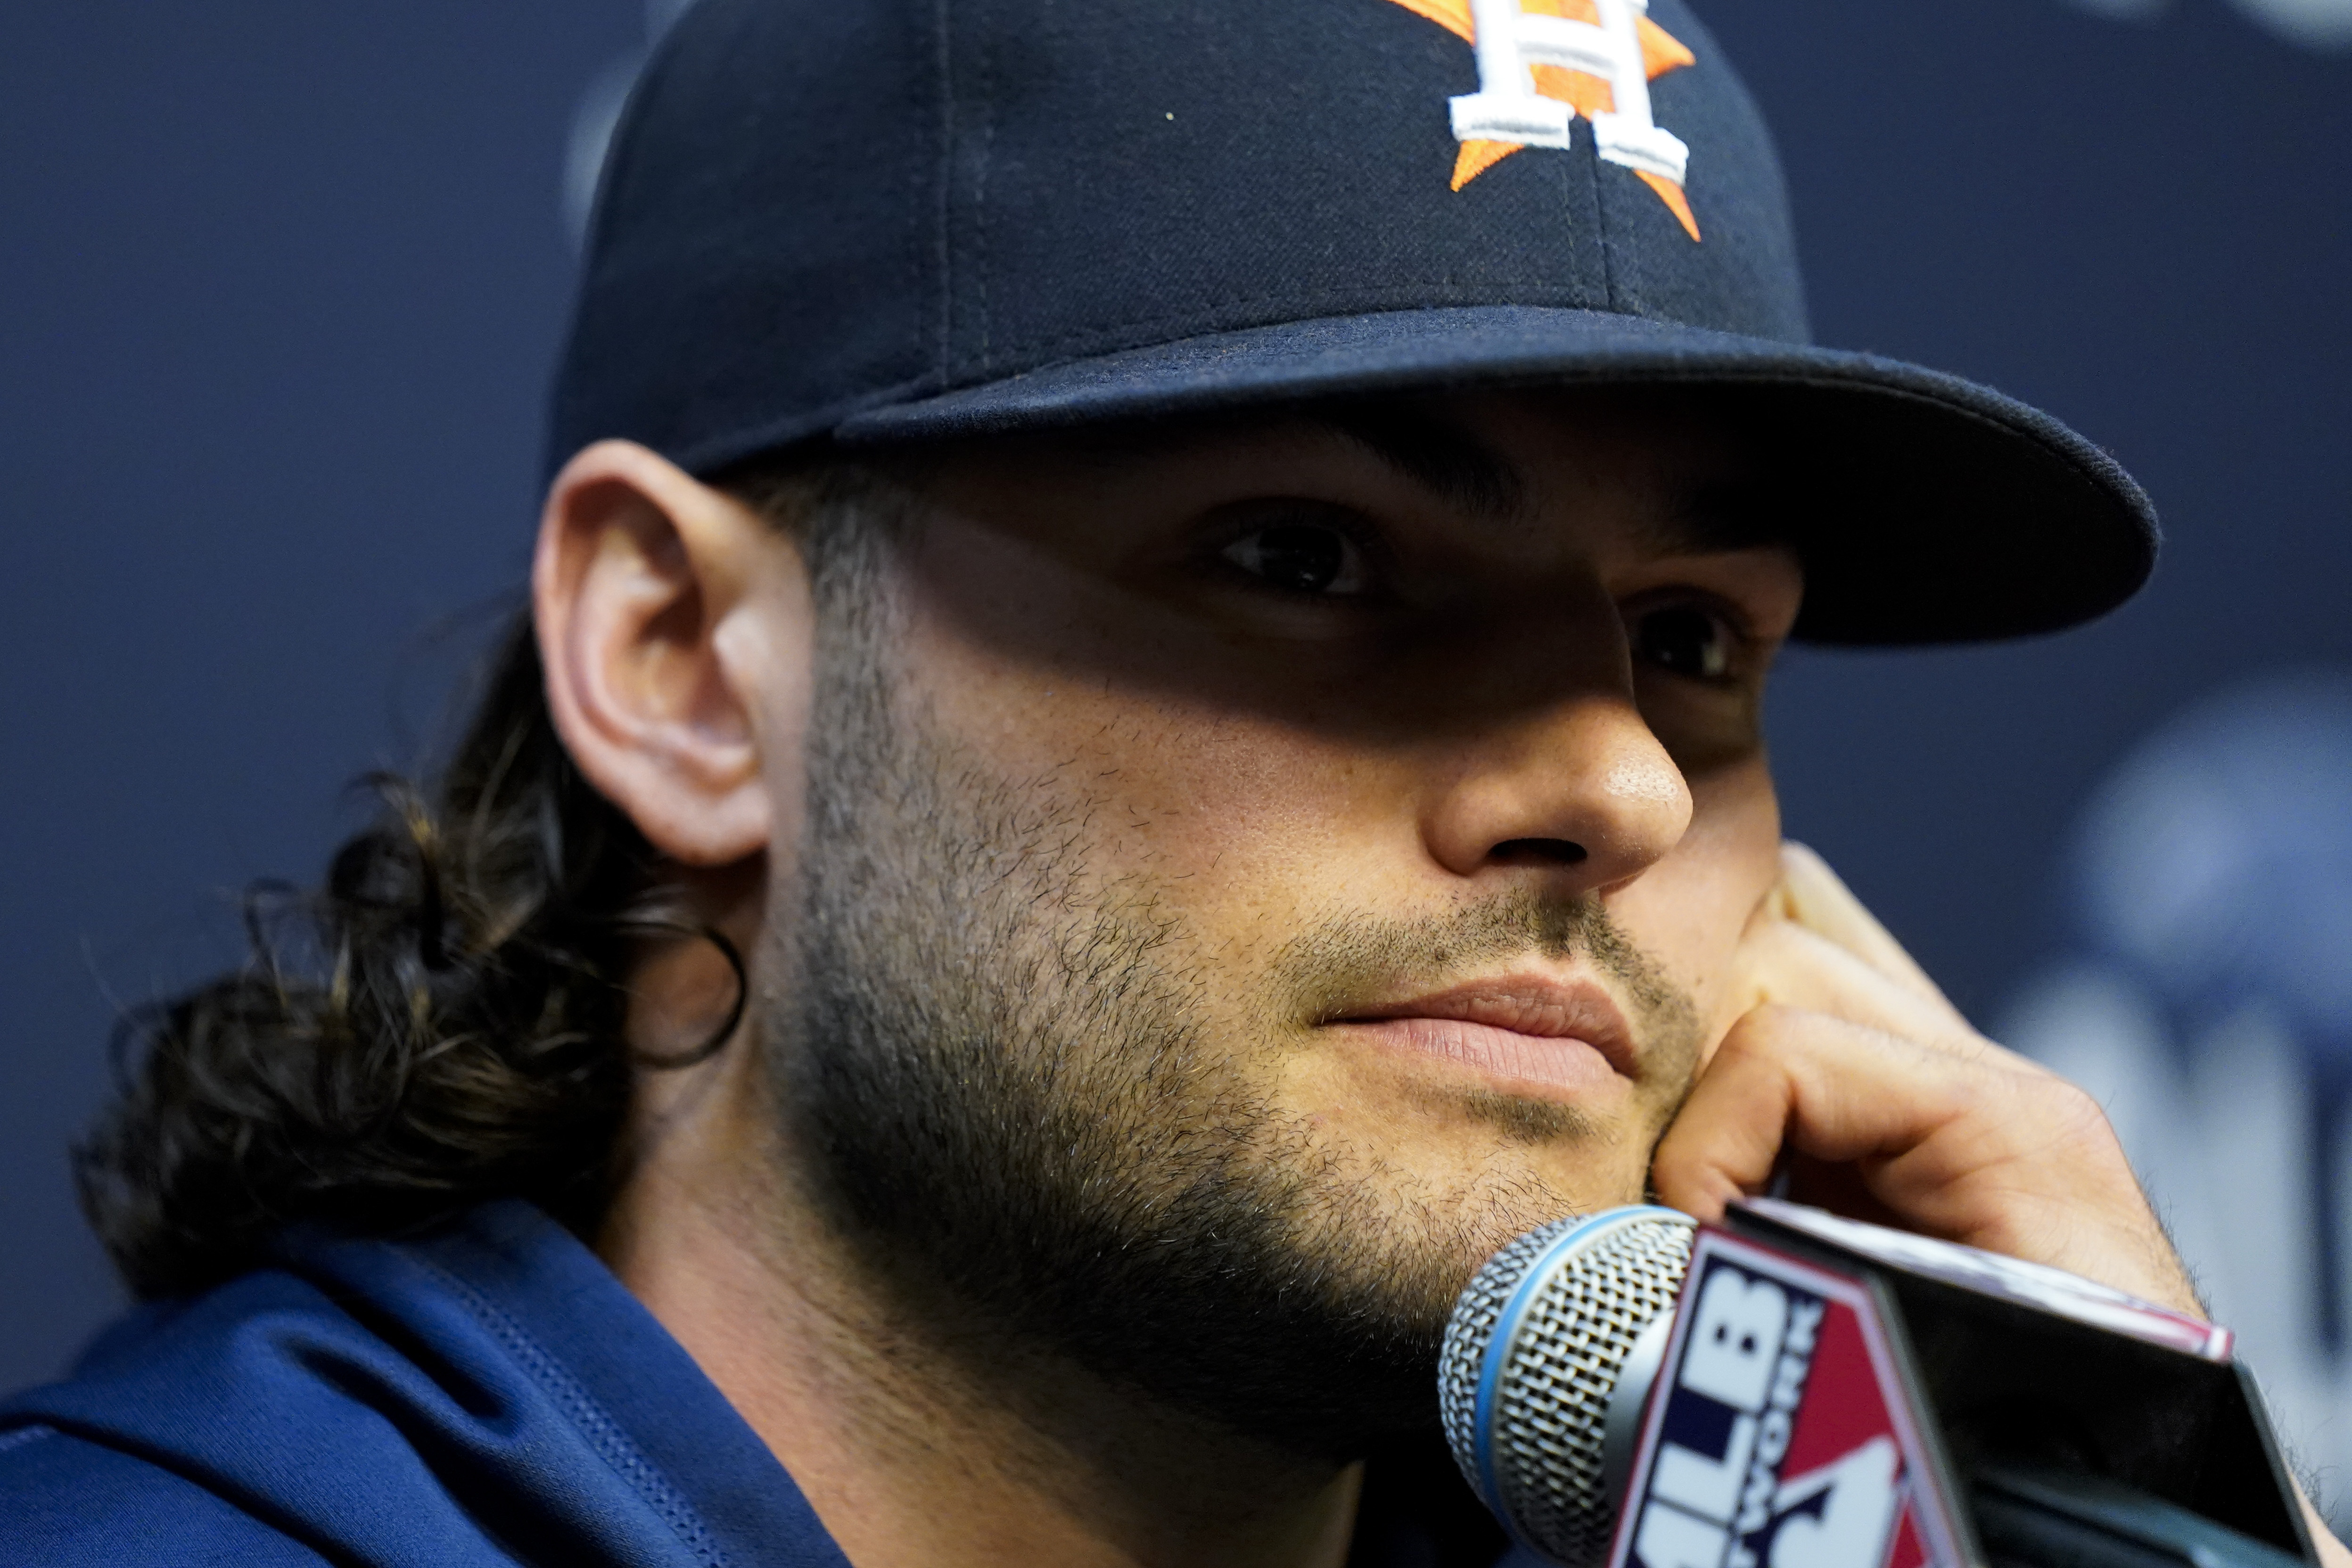 Astros pitcher Lance McCullers Jr. explains arm injury